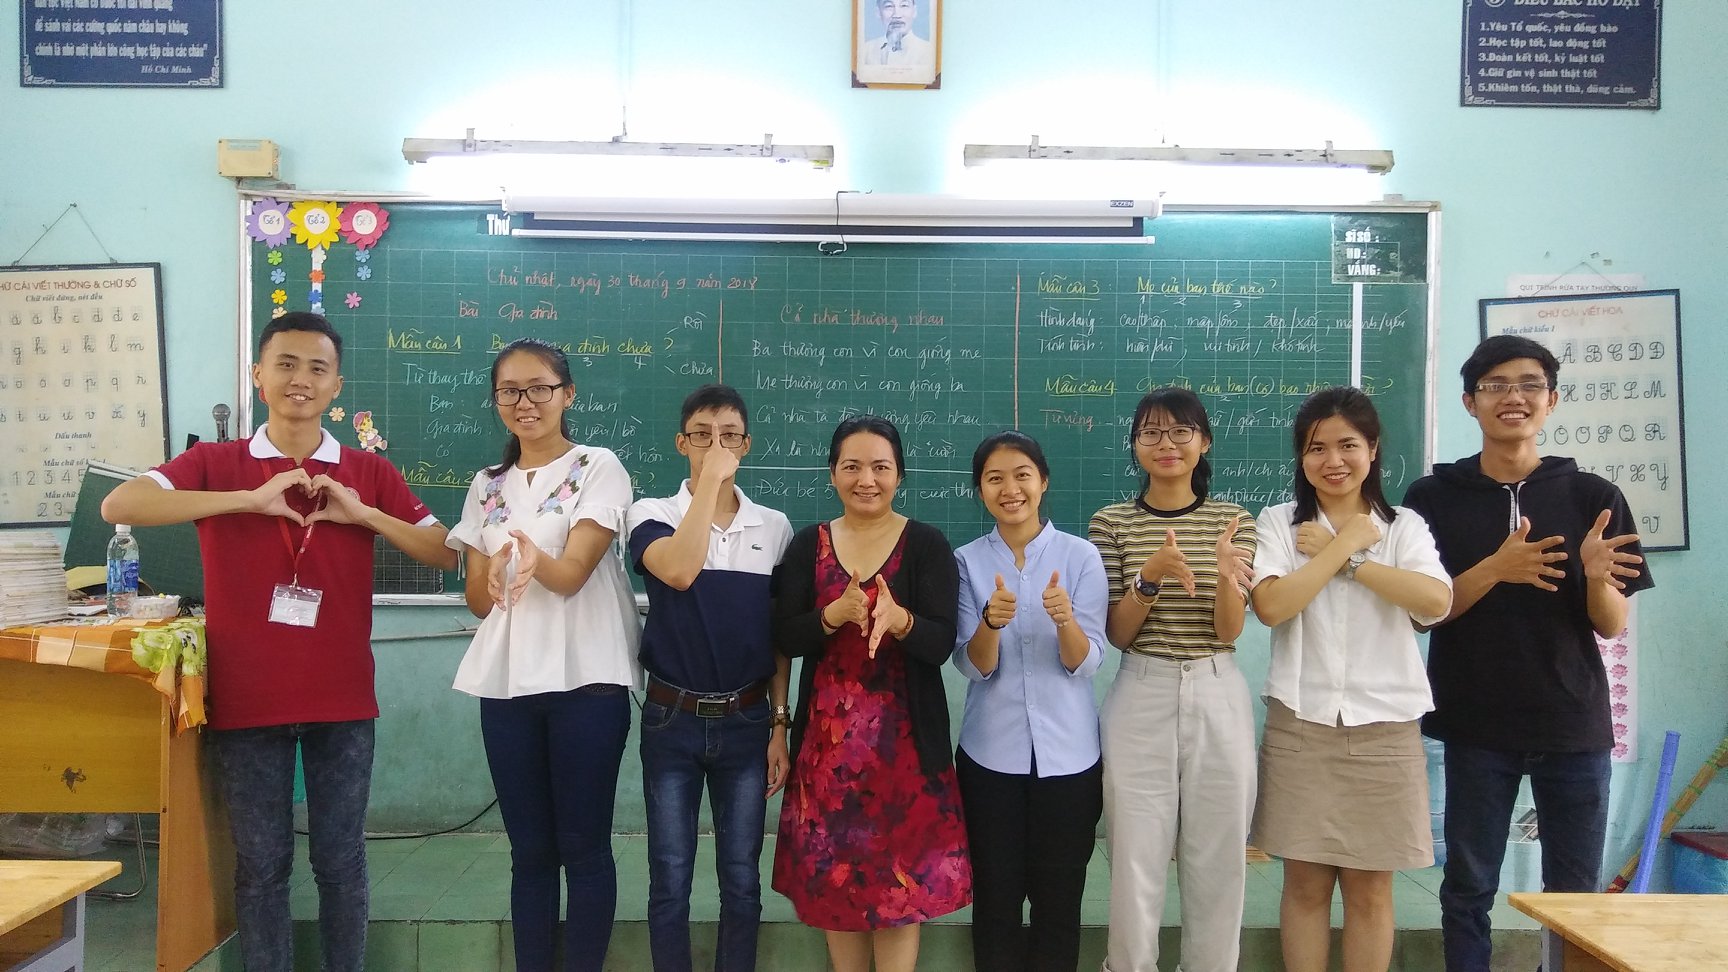 Announcement: Opening the Basic Sign Language Class Course 61